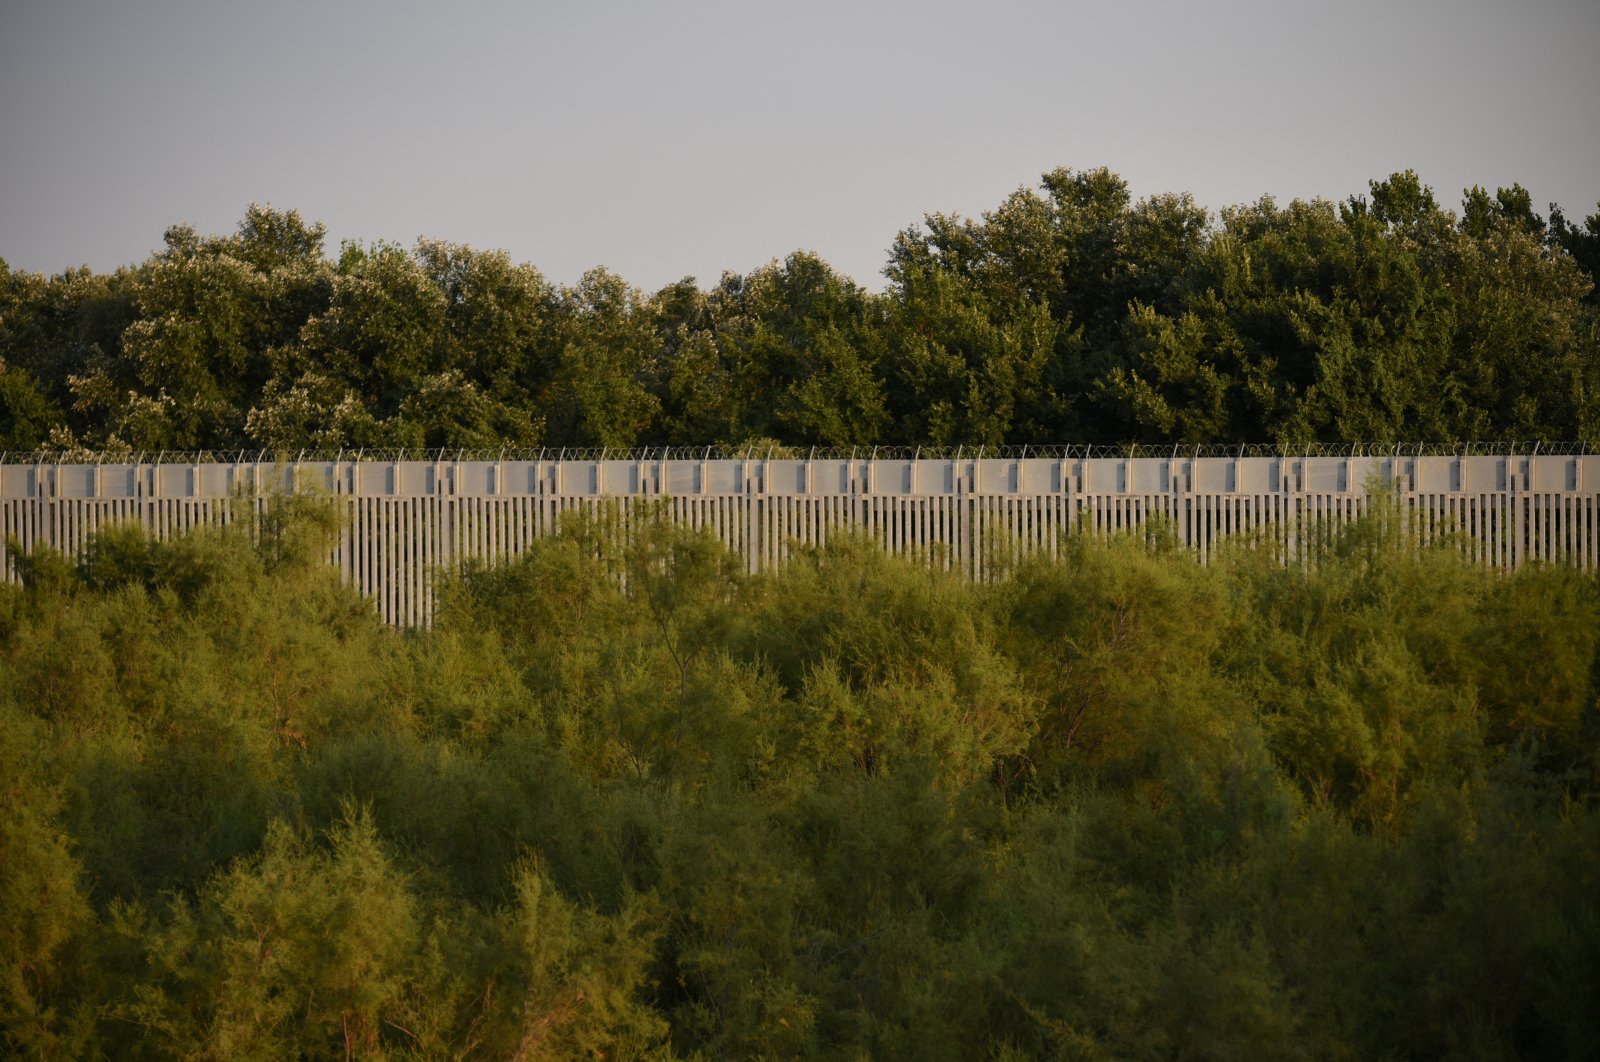 A view of the border fence between Greece and Türkiye, in Alexandroupolis, Greece, Aug. 10, 2021. (REUTERS Photo)